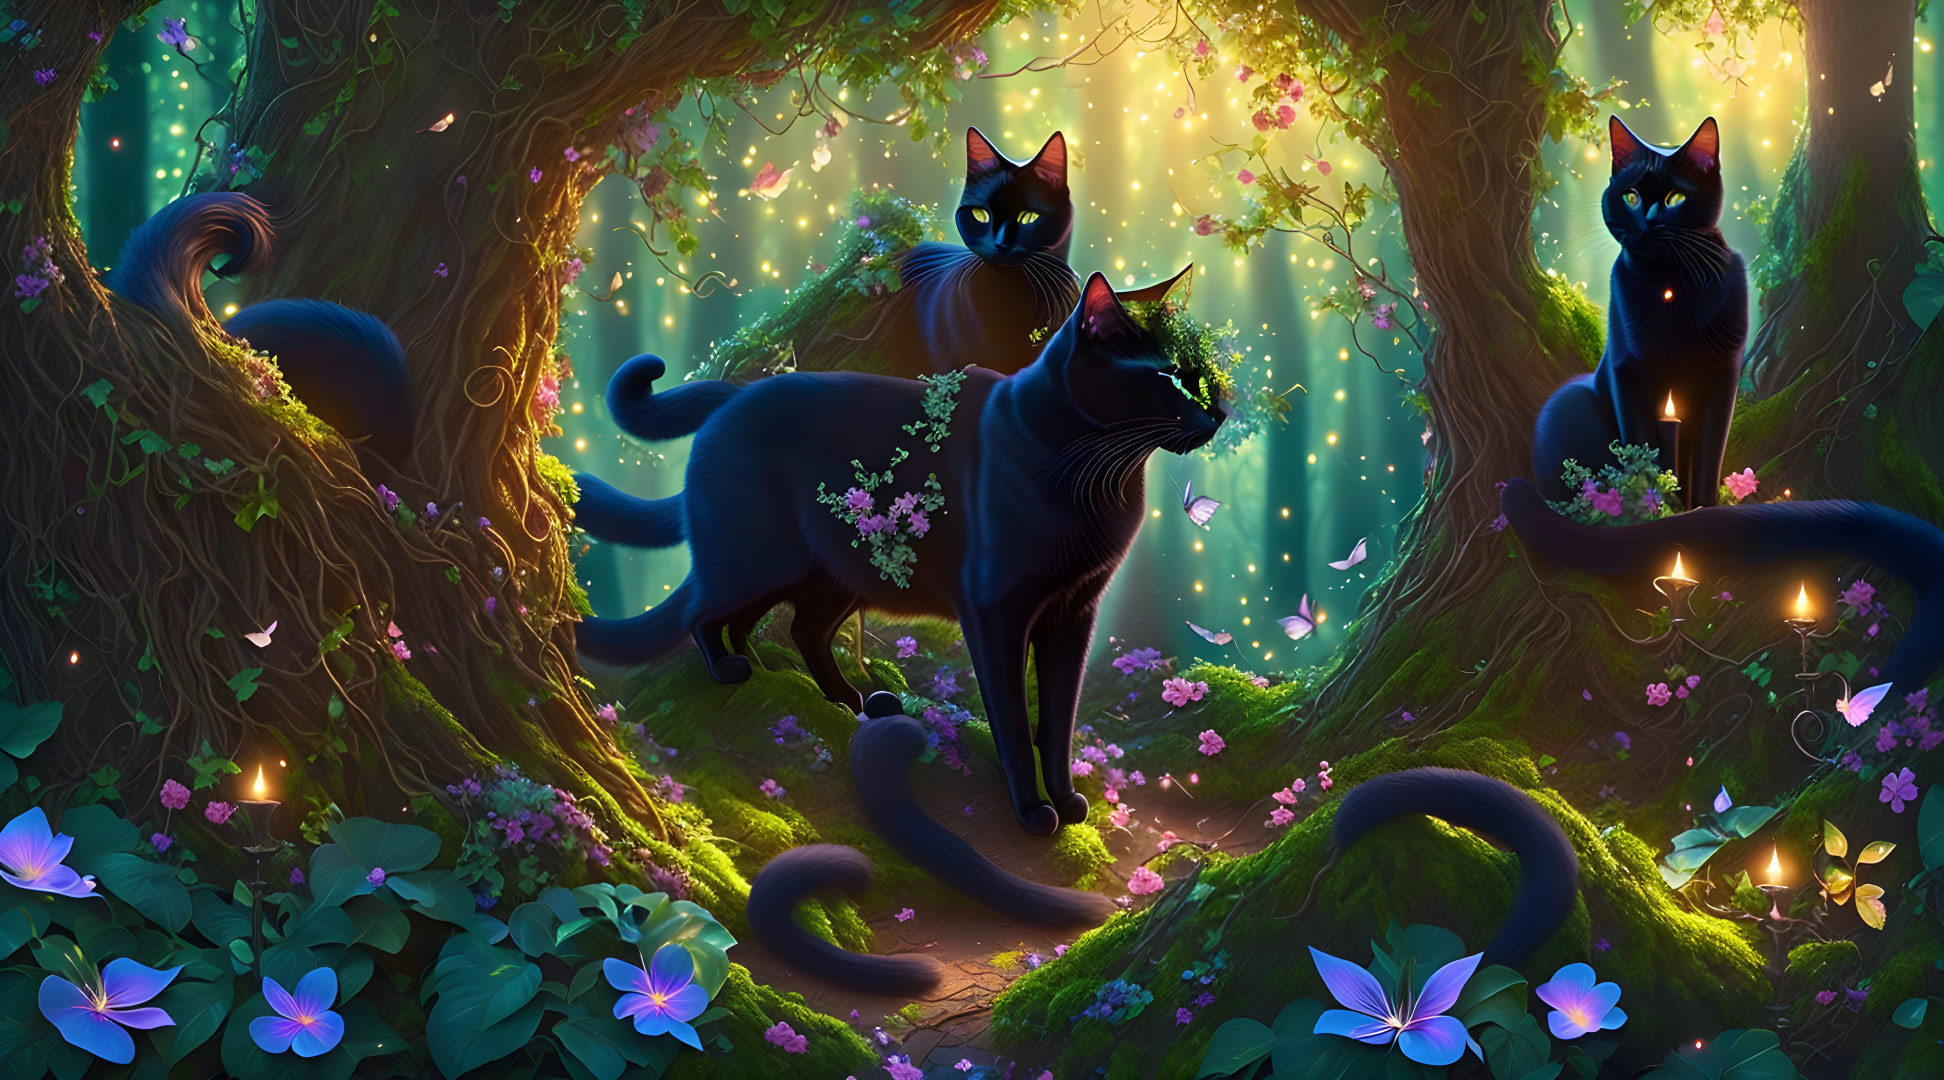 A black cat in a fairy forest